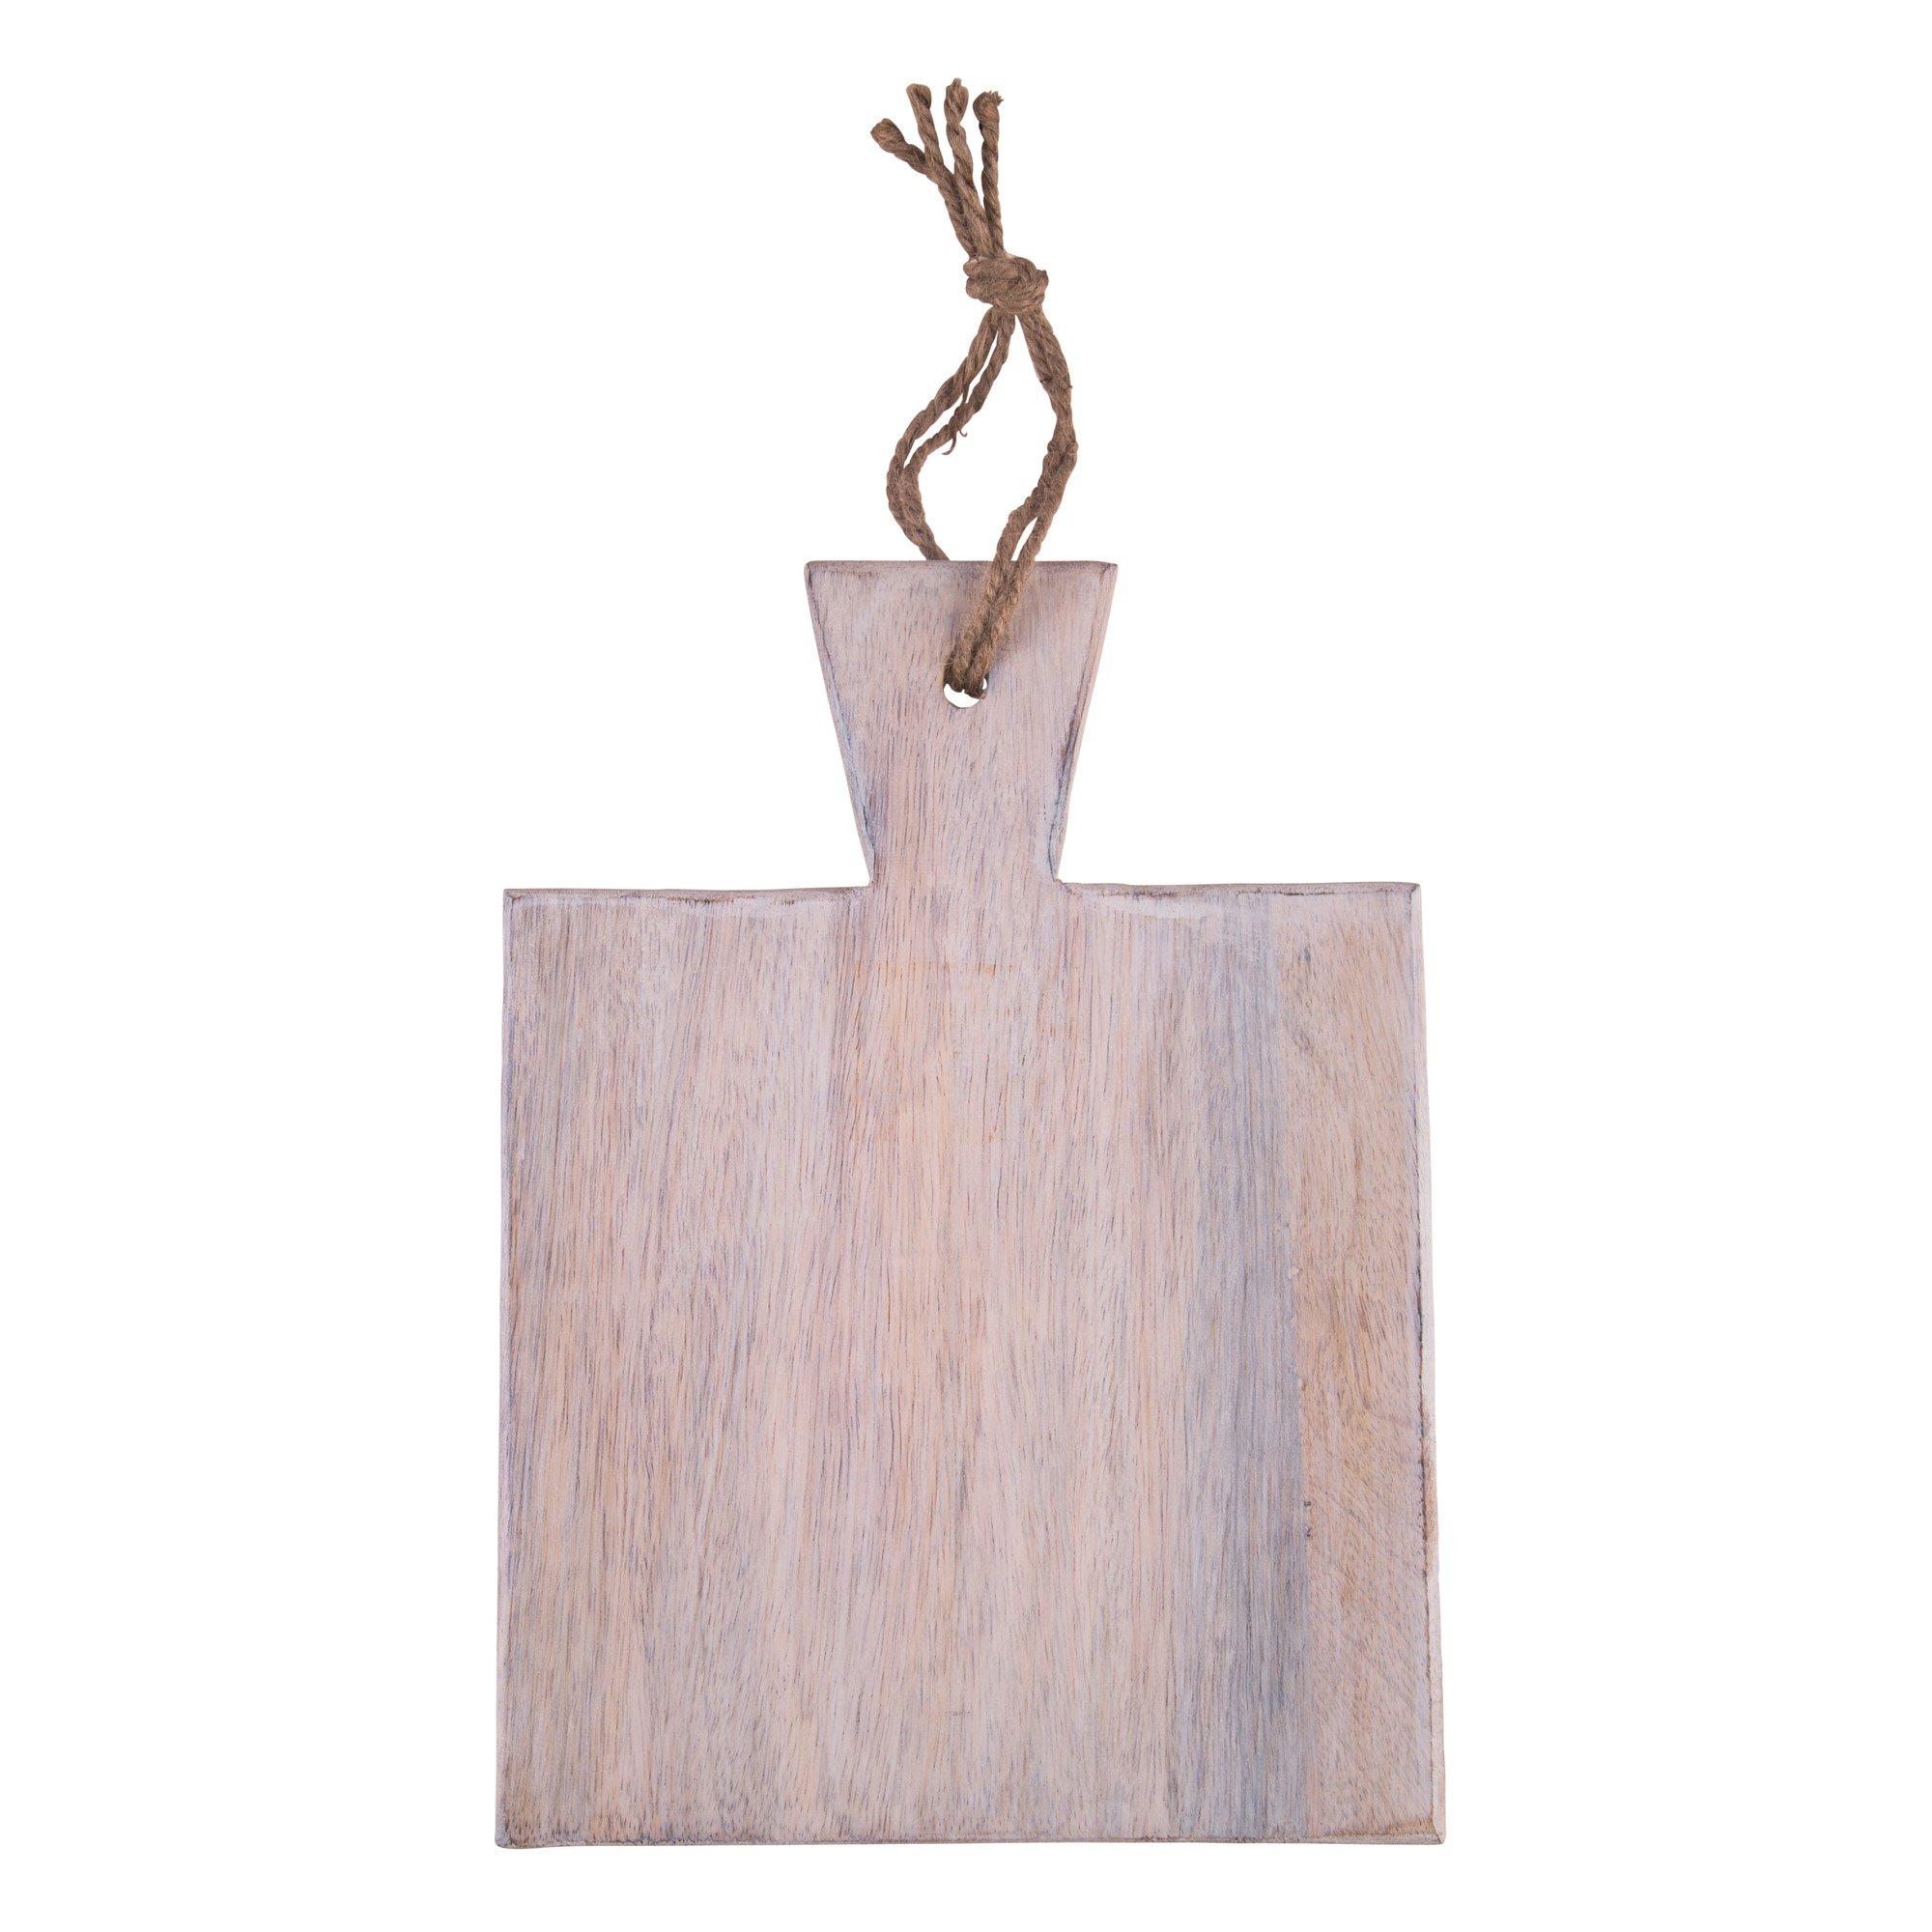 10 in. Square Light Wood Cutting Board